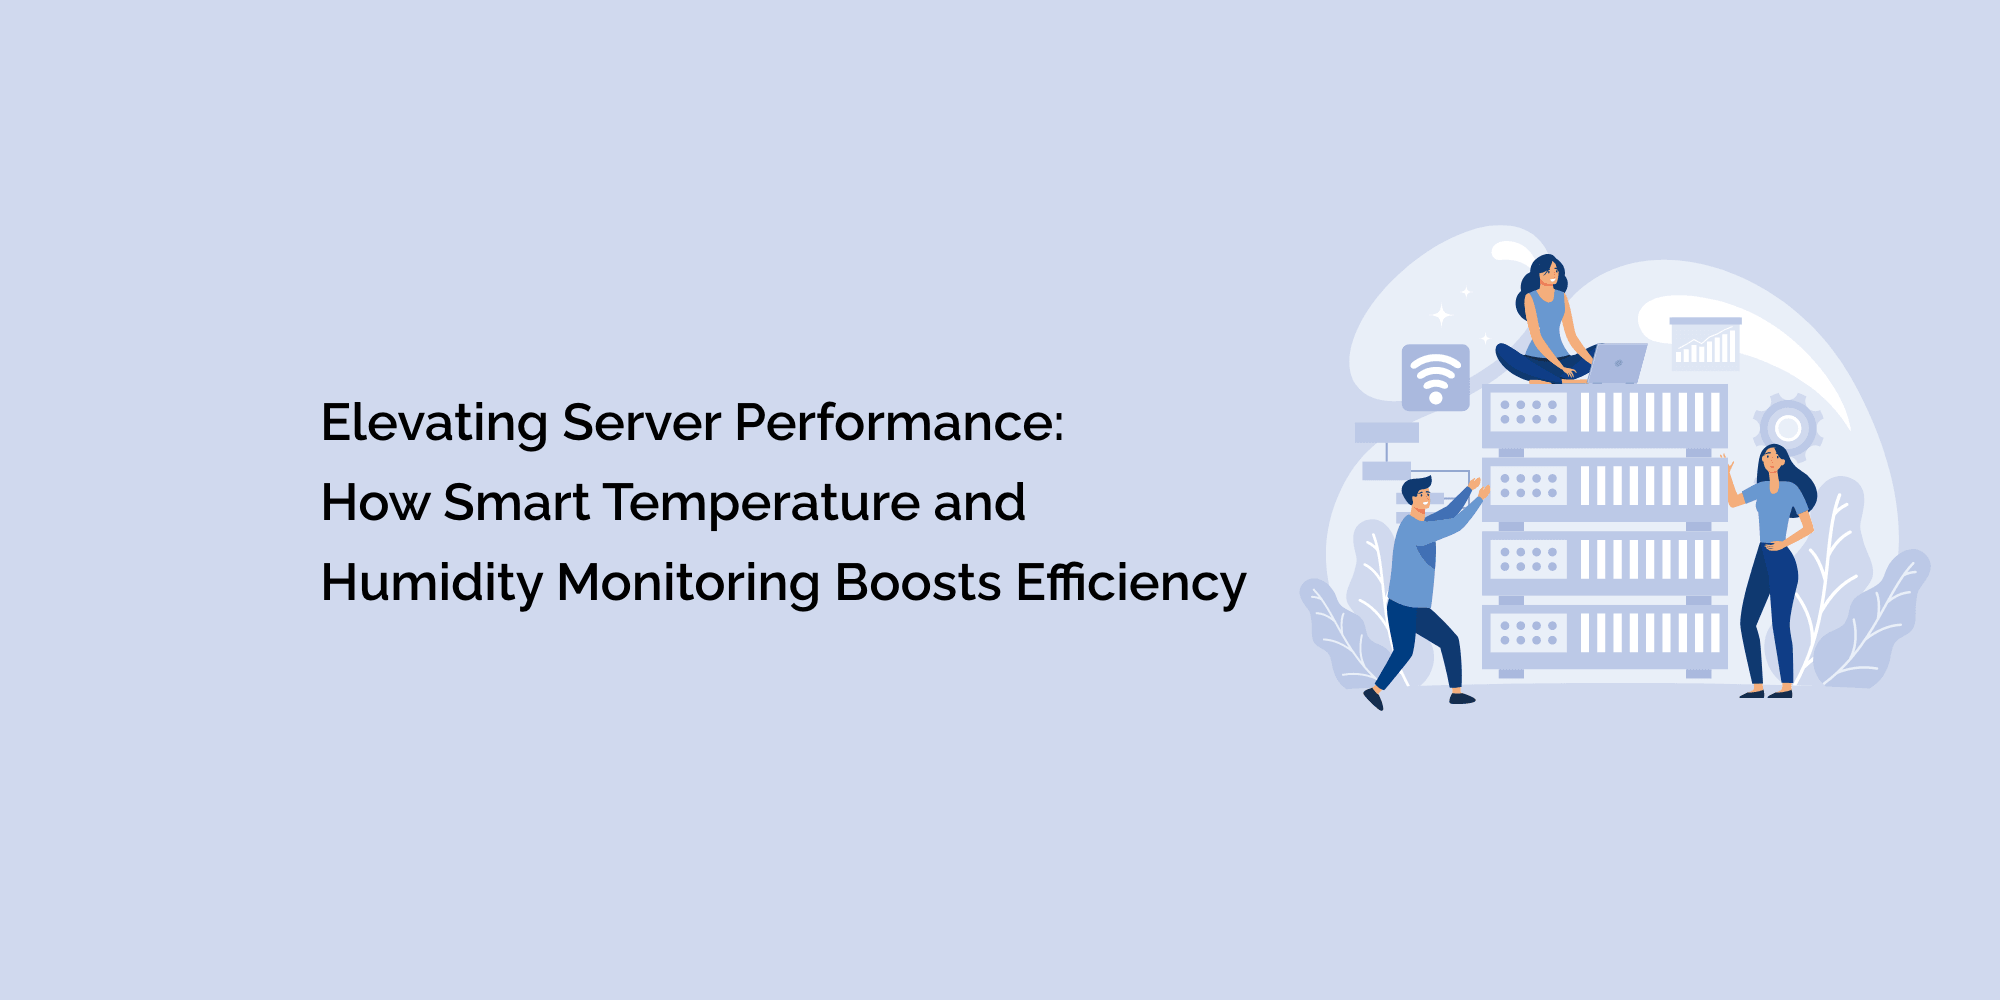 Elevating Server Performance: How Smart Temperature and Humidity Monitoring Boosts Efficiency